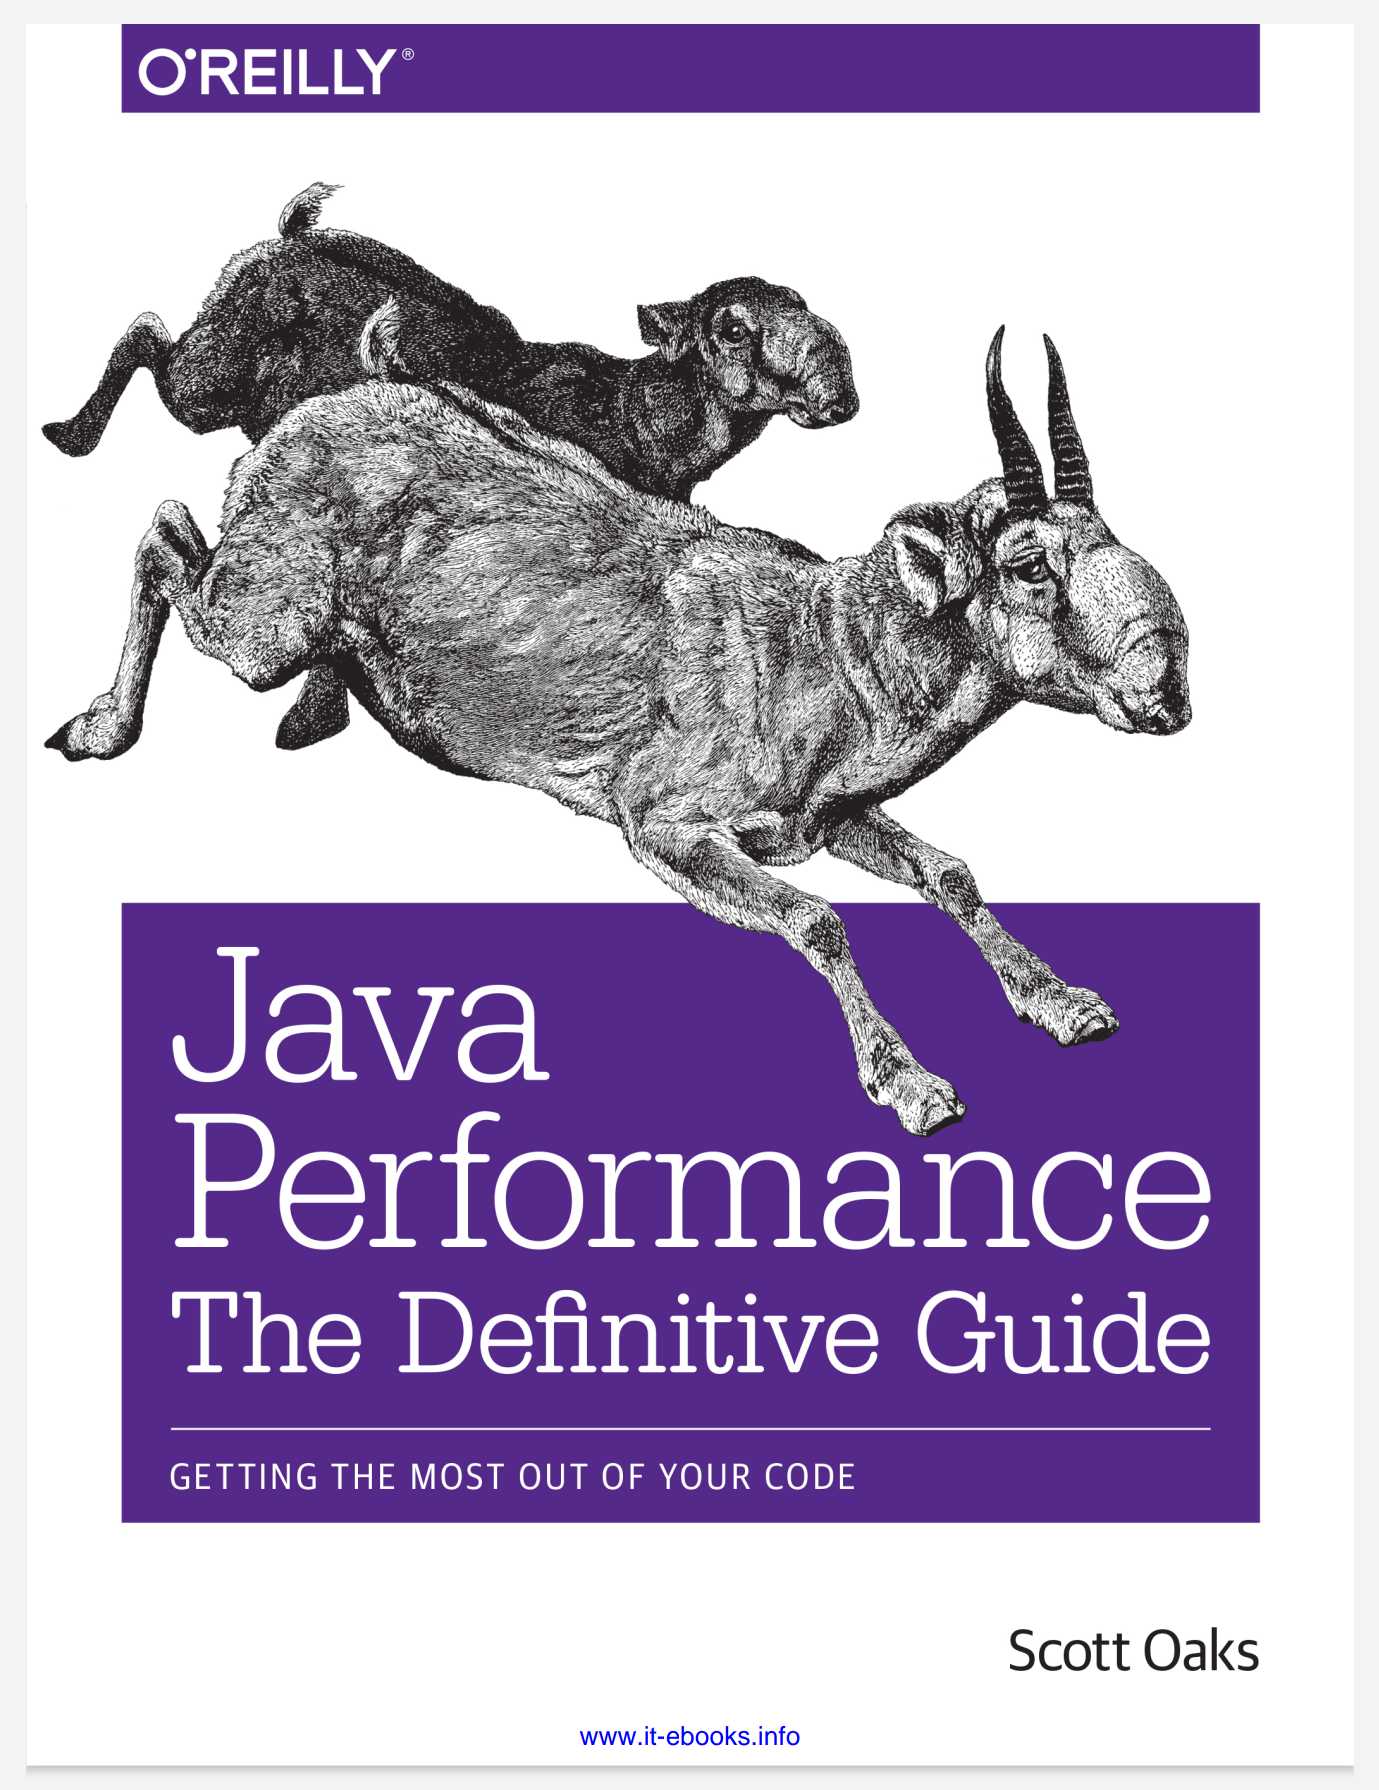 Java Performance: The Definitive Guide: Getting the Most Out of Your Code 1st Edition by Scott Oaks